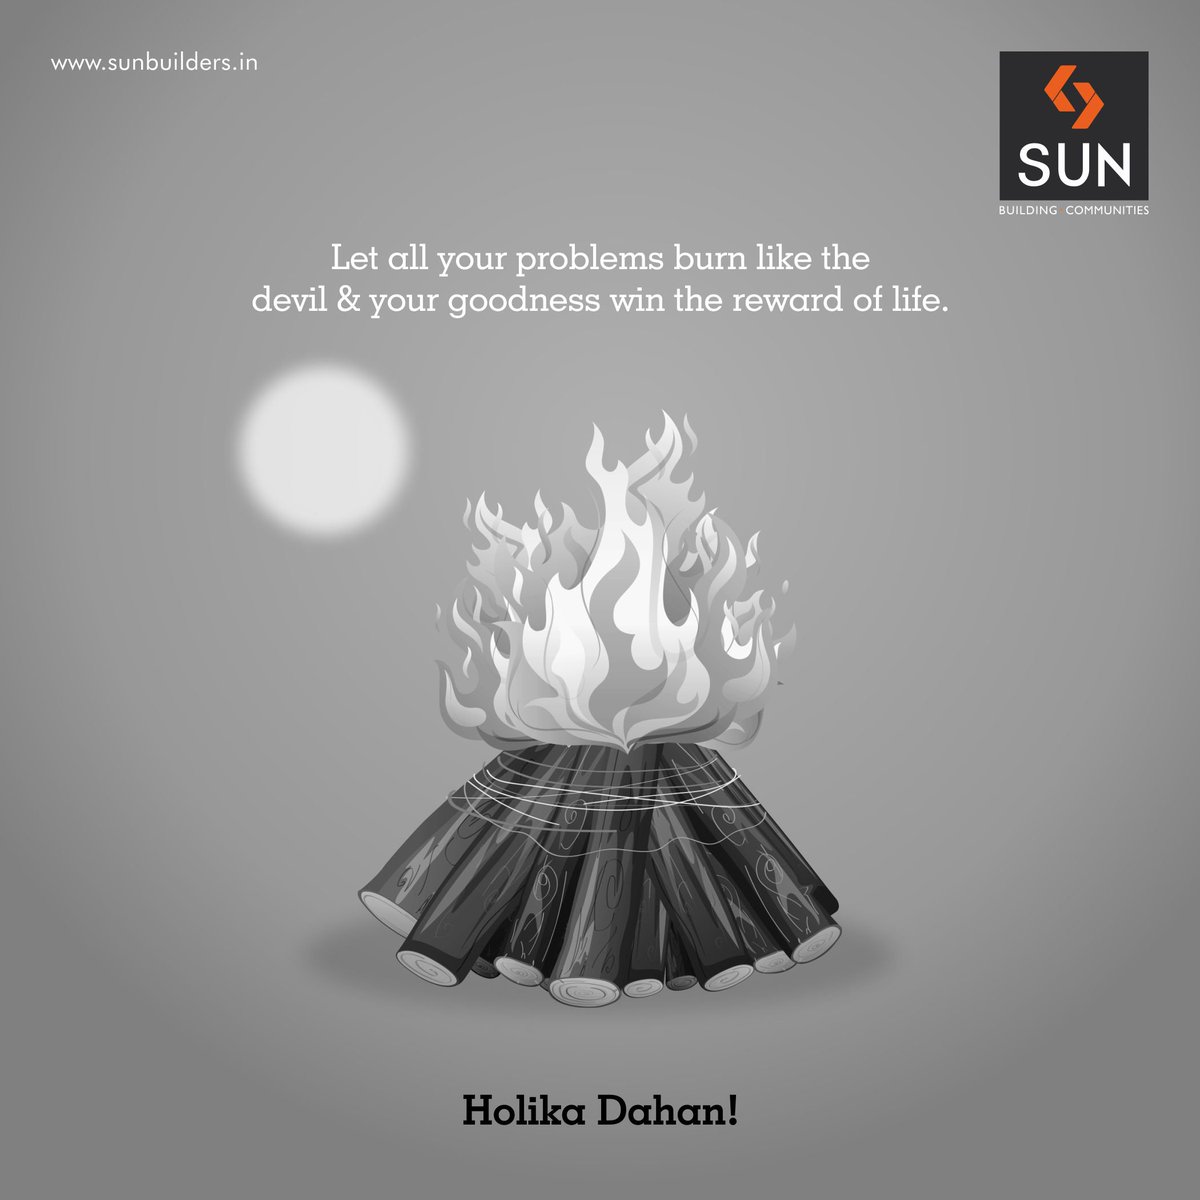 Believe in your truthfulness & the divine powers to let you win over your problems& live a great life. 
#holikadahan https://t.co/TbCXeXlSG6